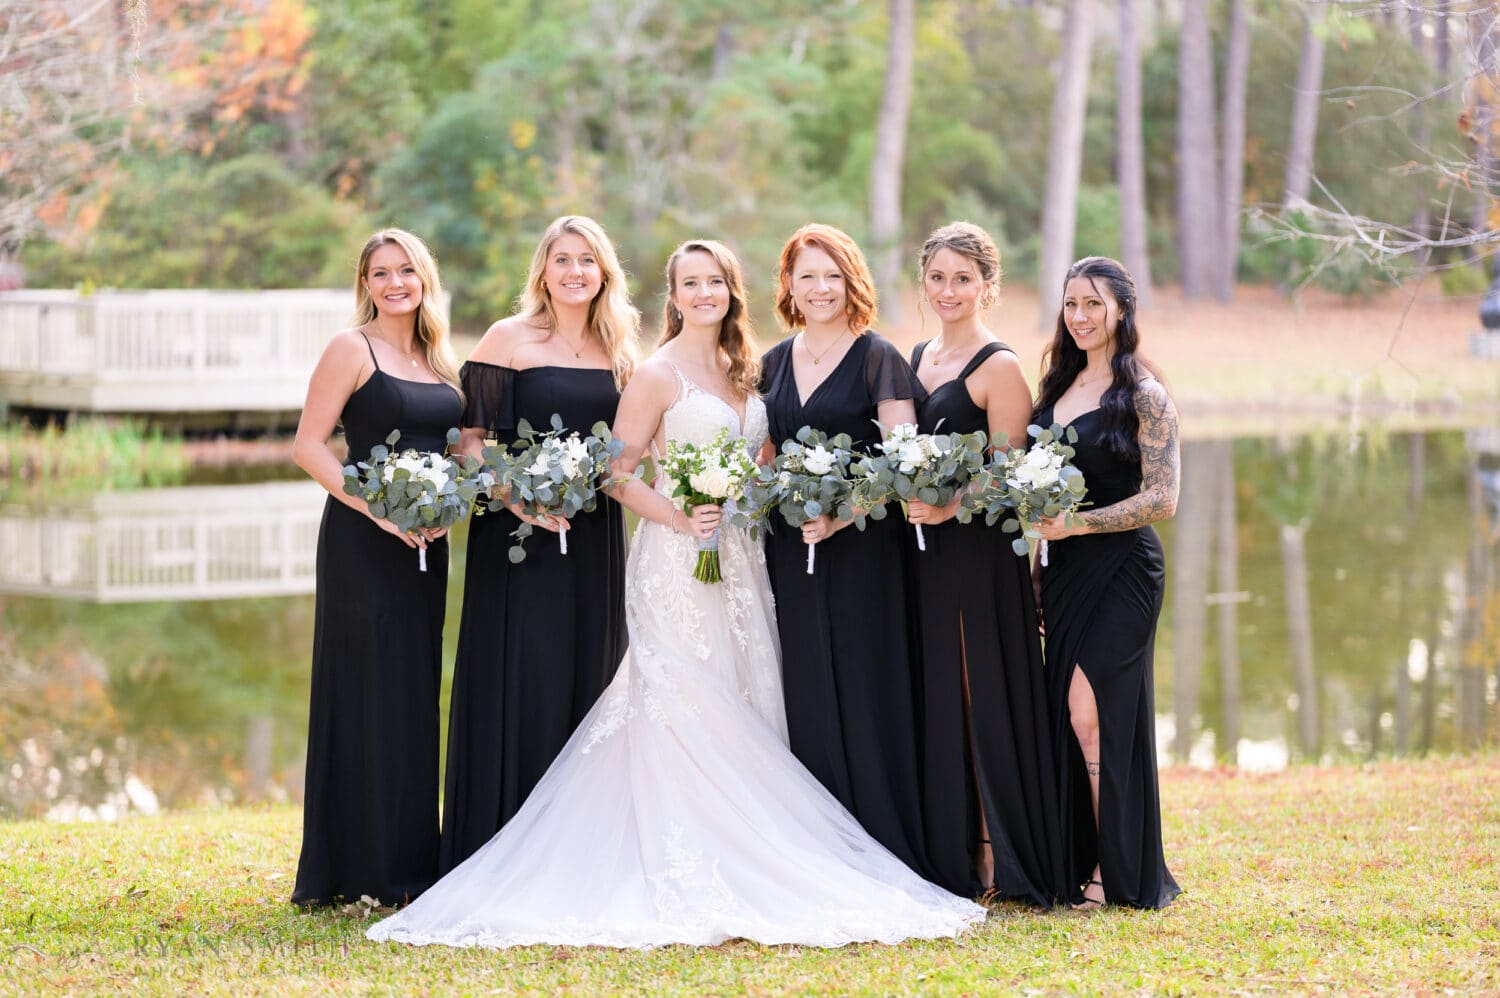 Bride with bridesmaids by the pond - Brookgreen Gardens